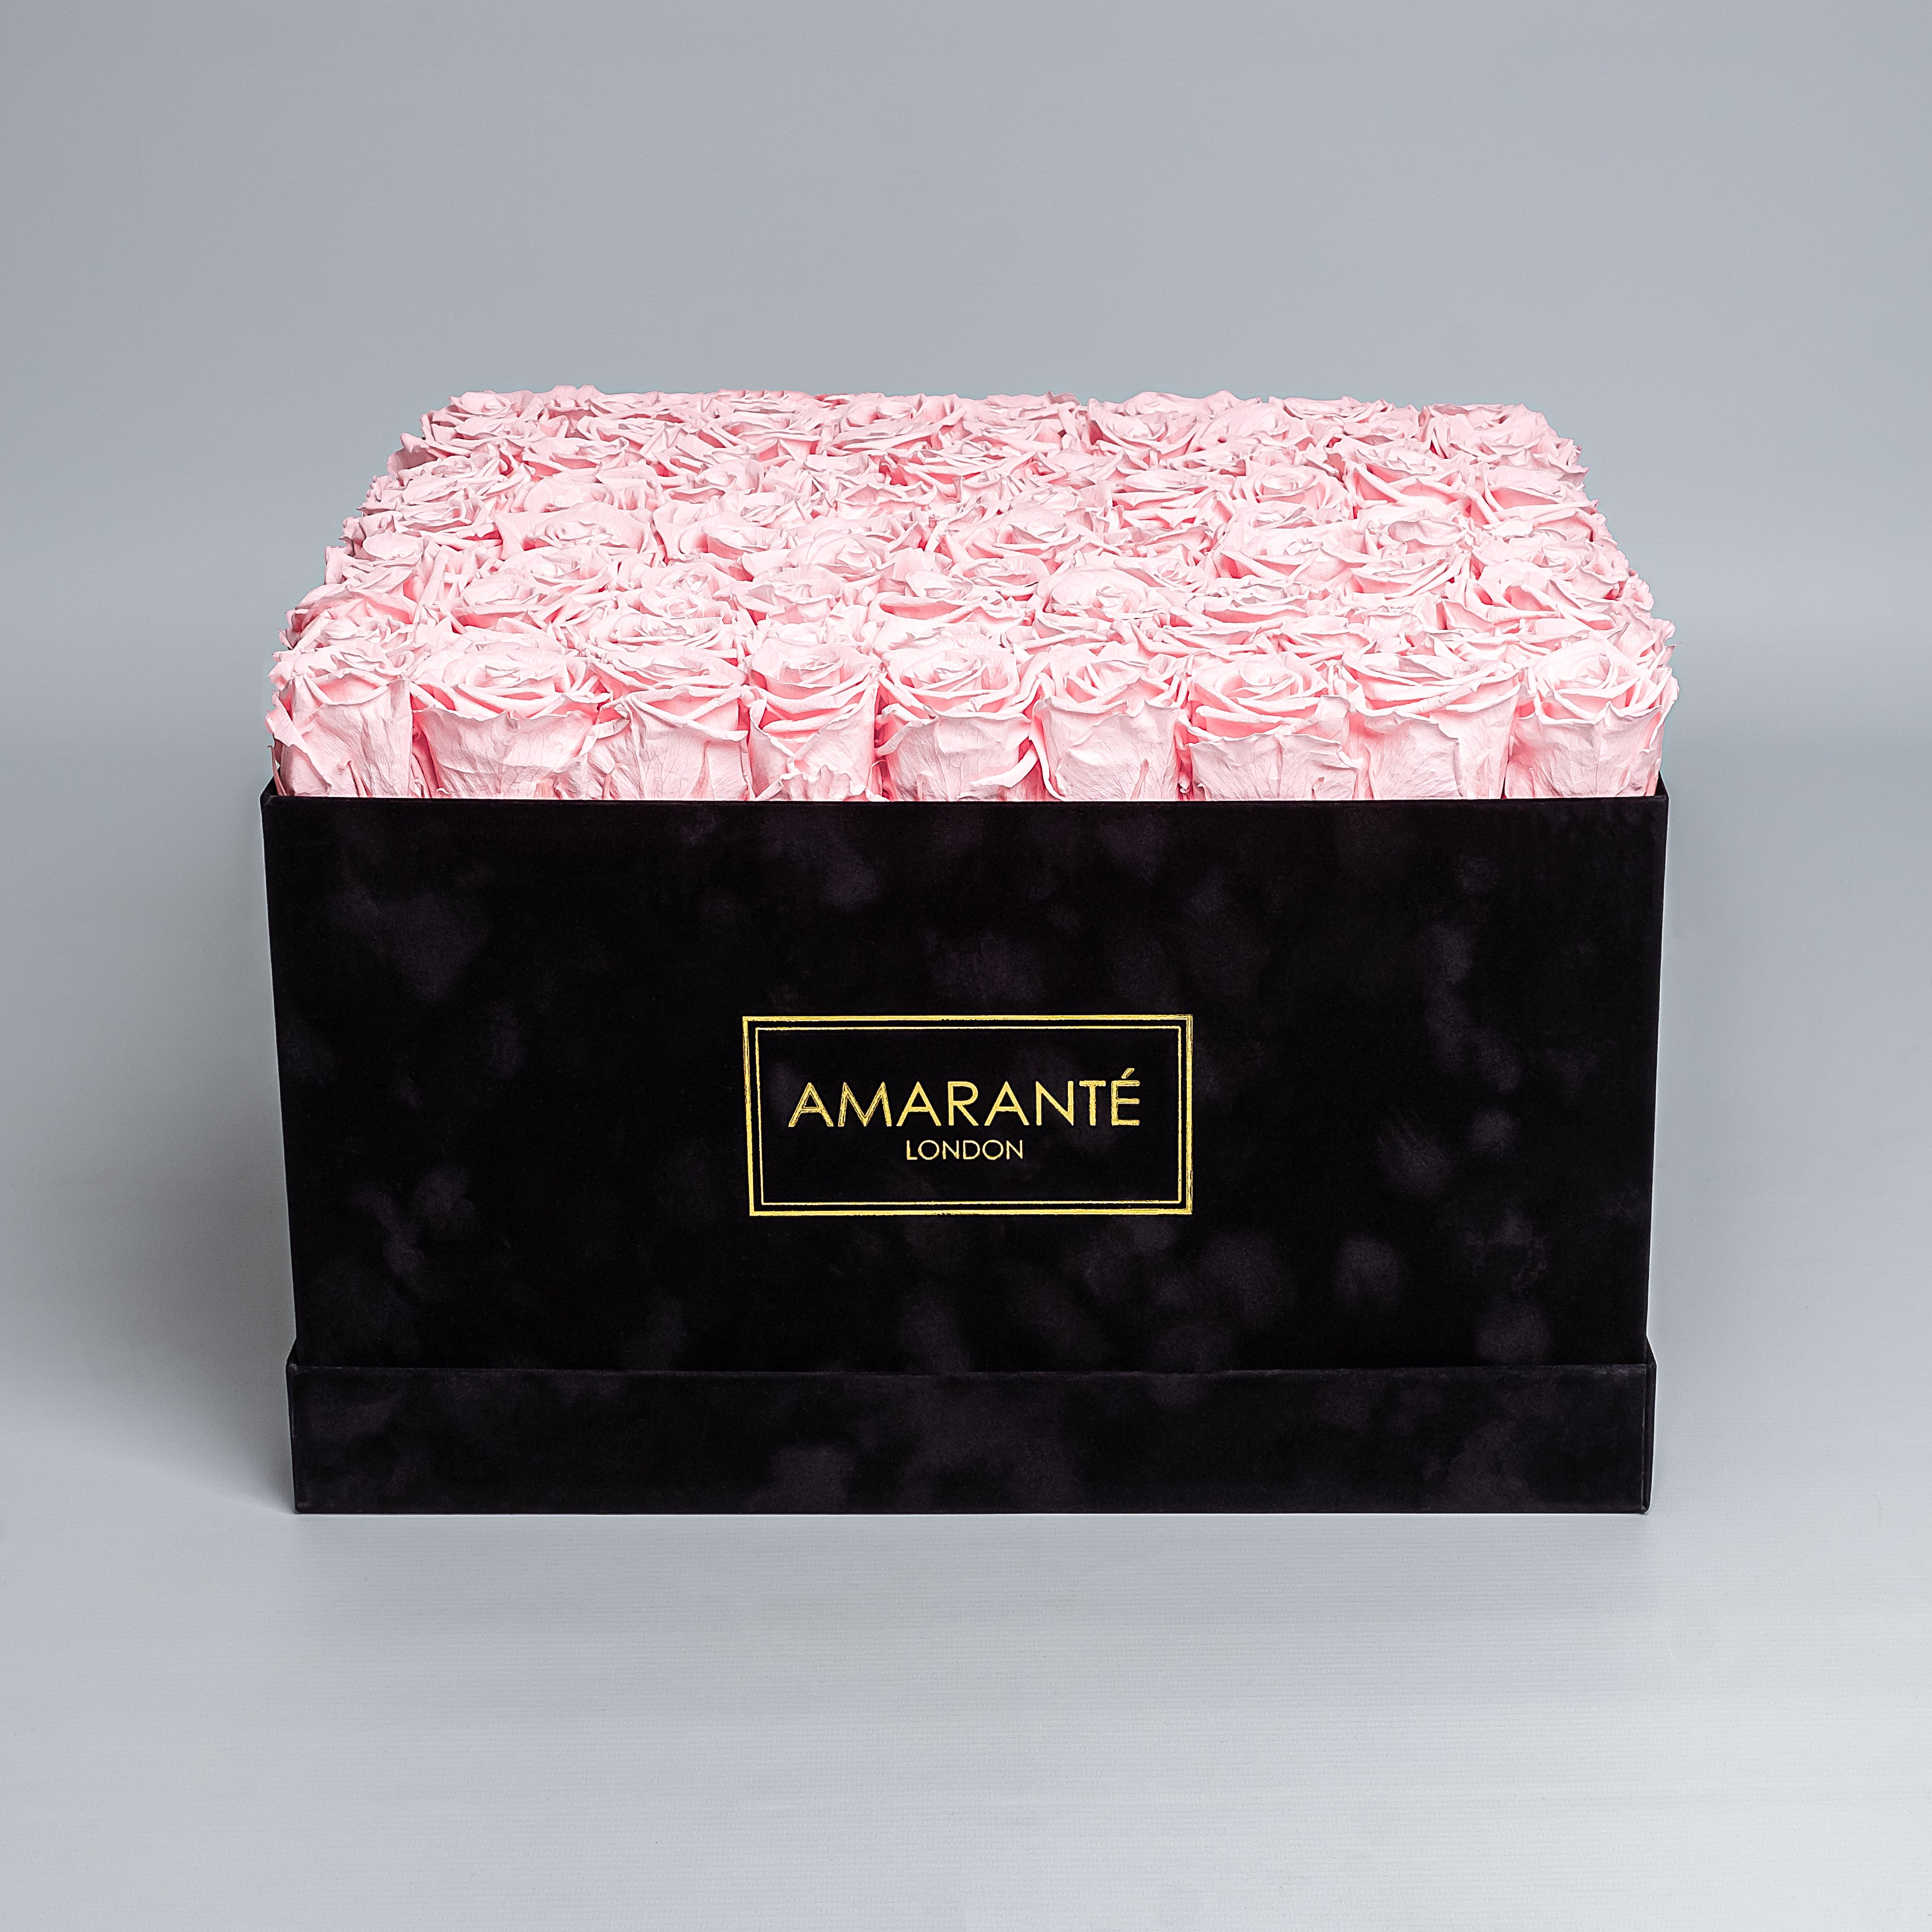 Luxurious 16&quot;x16&quot; black square rose box of pink everlasting roses with an elegant suede finish, offering free UK delivery. Choose from a palette of 14 delicate pastel colours.